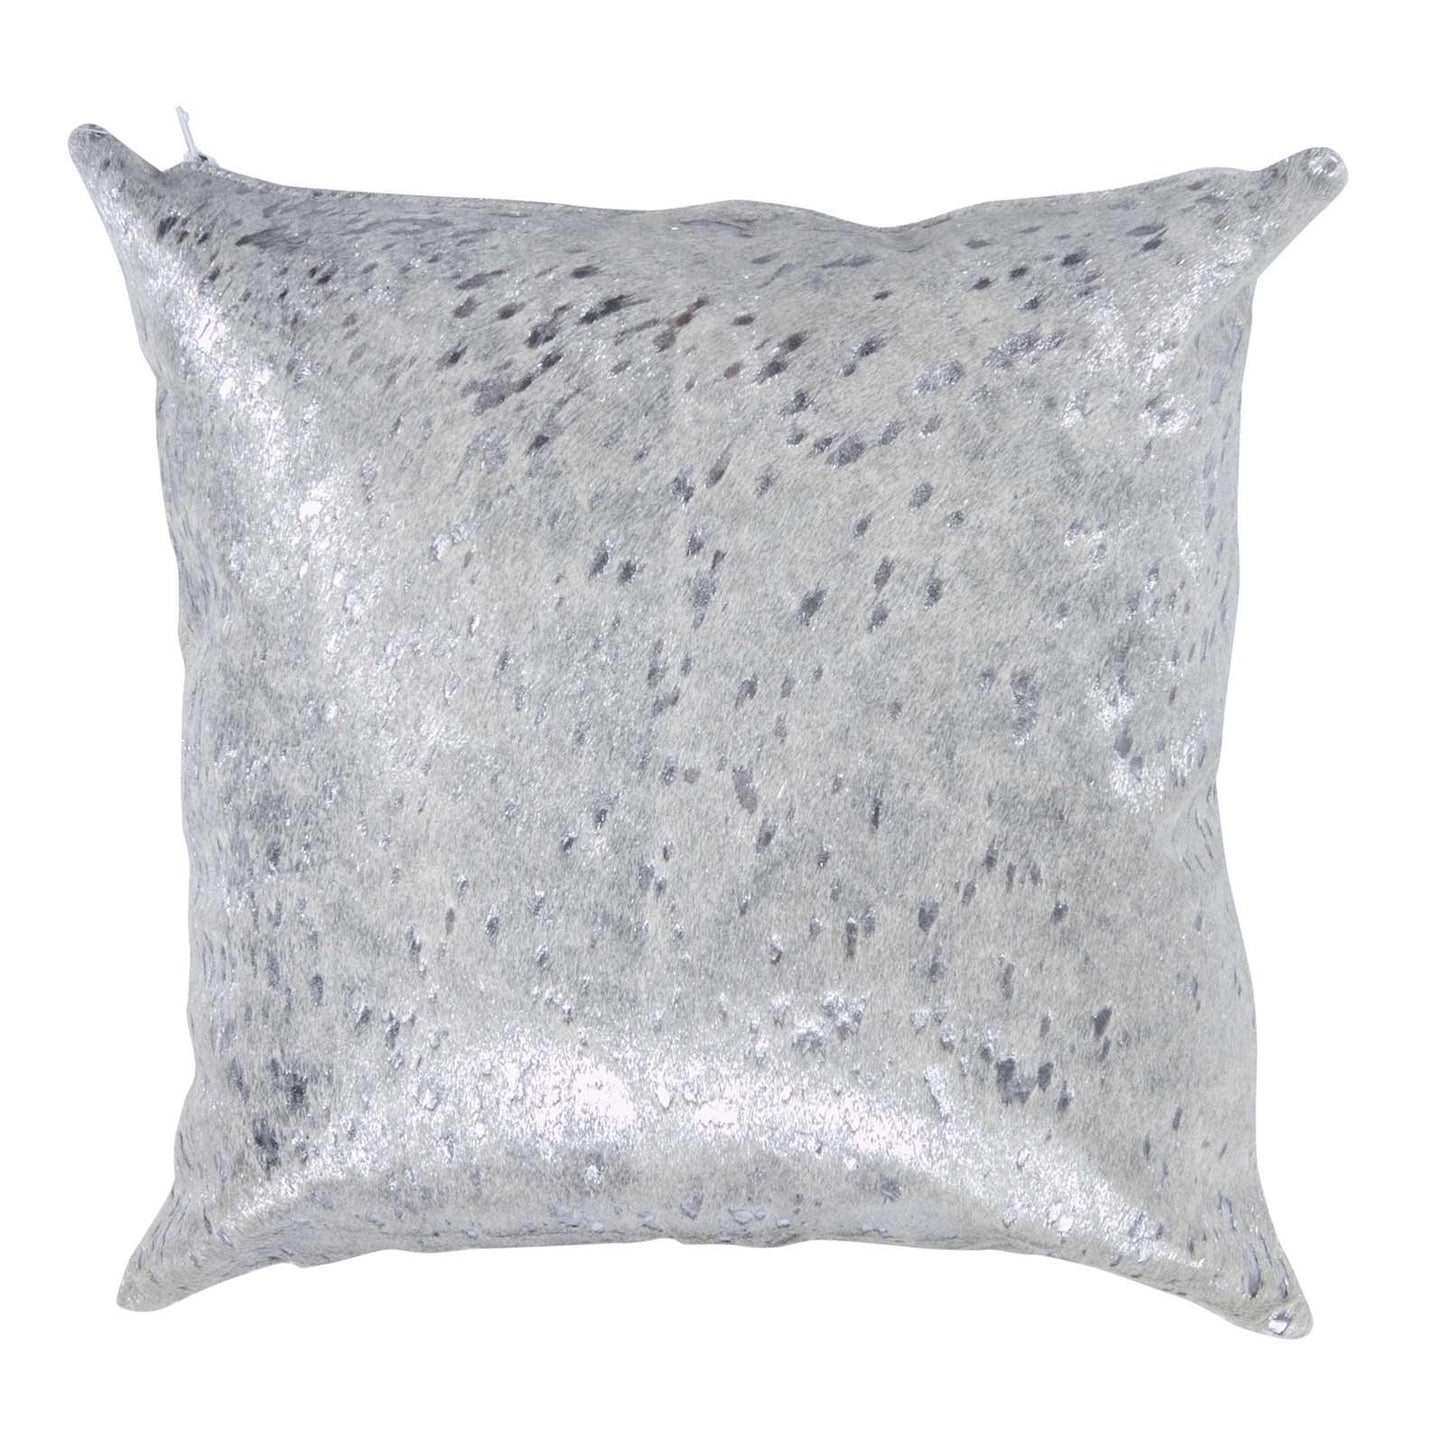 Silver on White Based Cowhide Pillow Case - Rodeo Cowhide Rugs